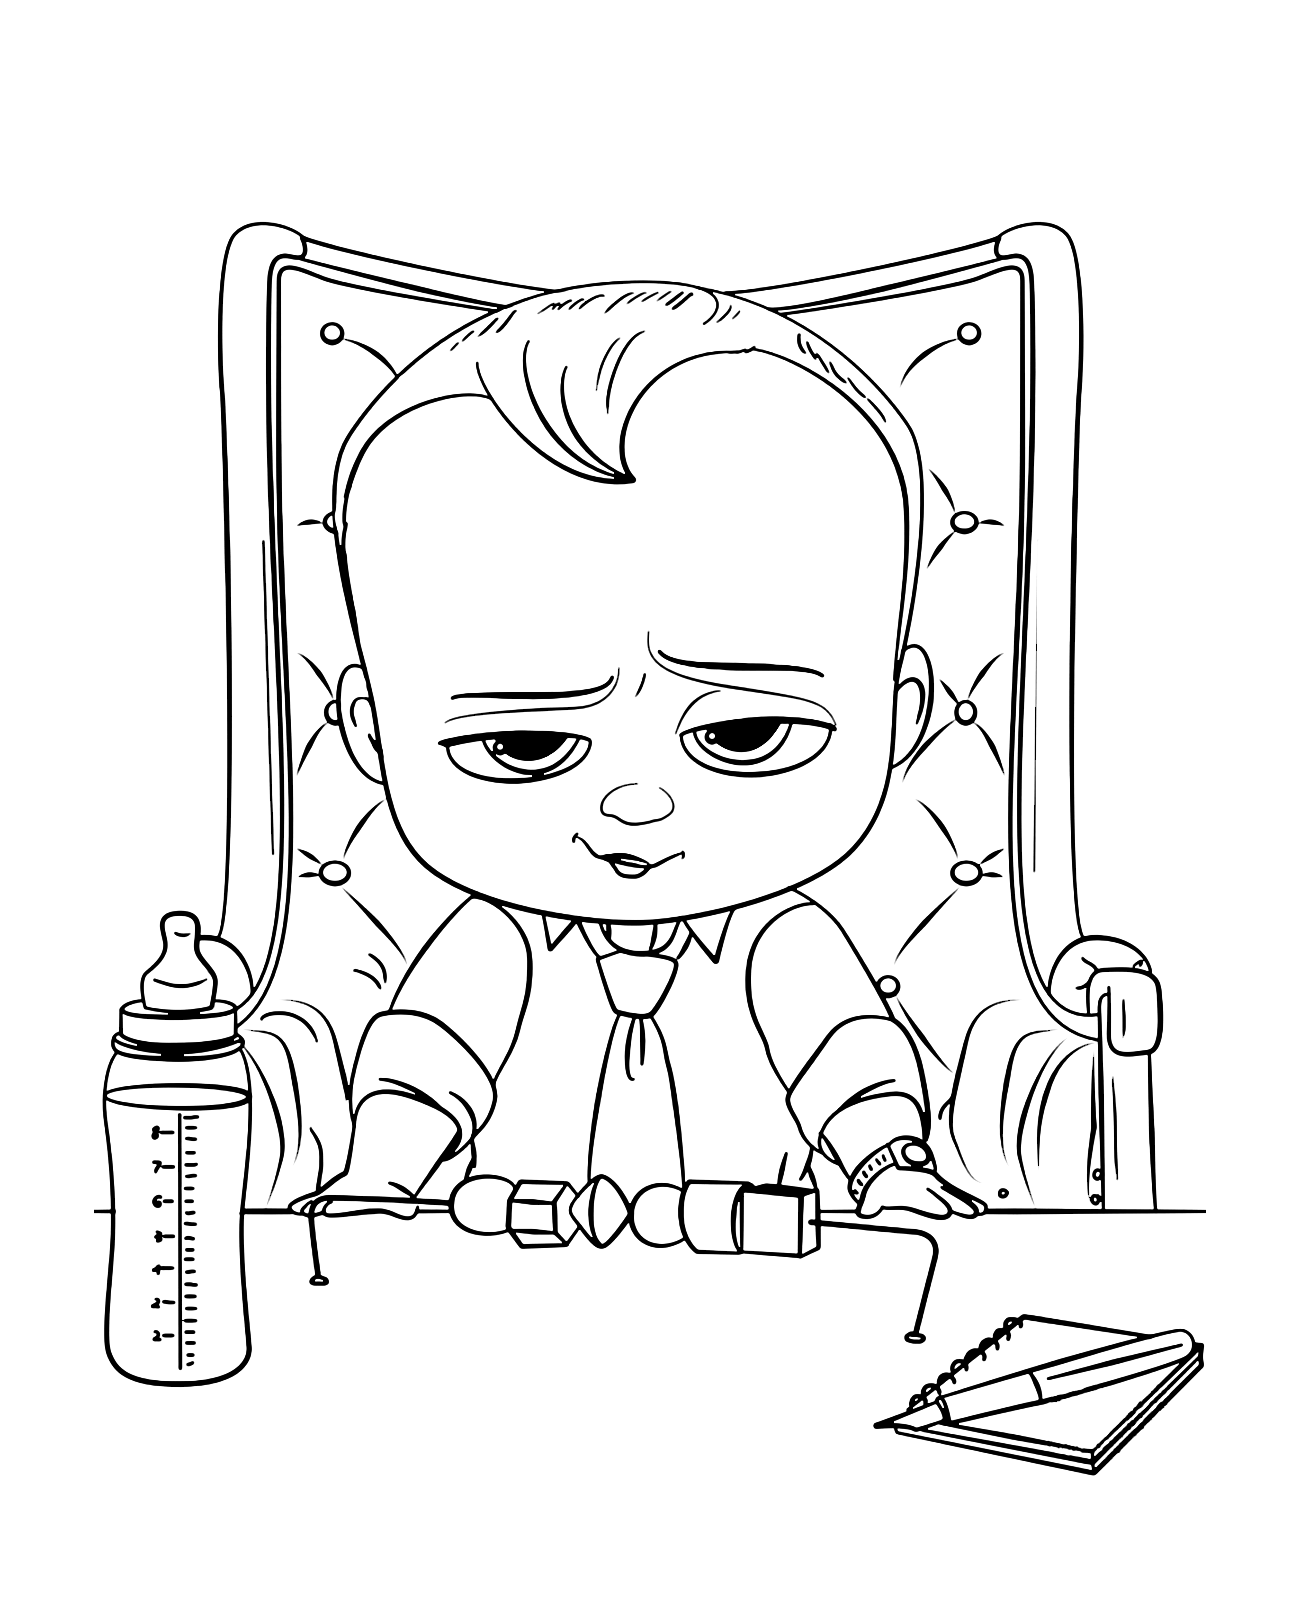 Learn How to Draw Baby Boss from The Boss Baby The Boss Baby Step by Step   Drawing Tutorials